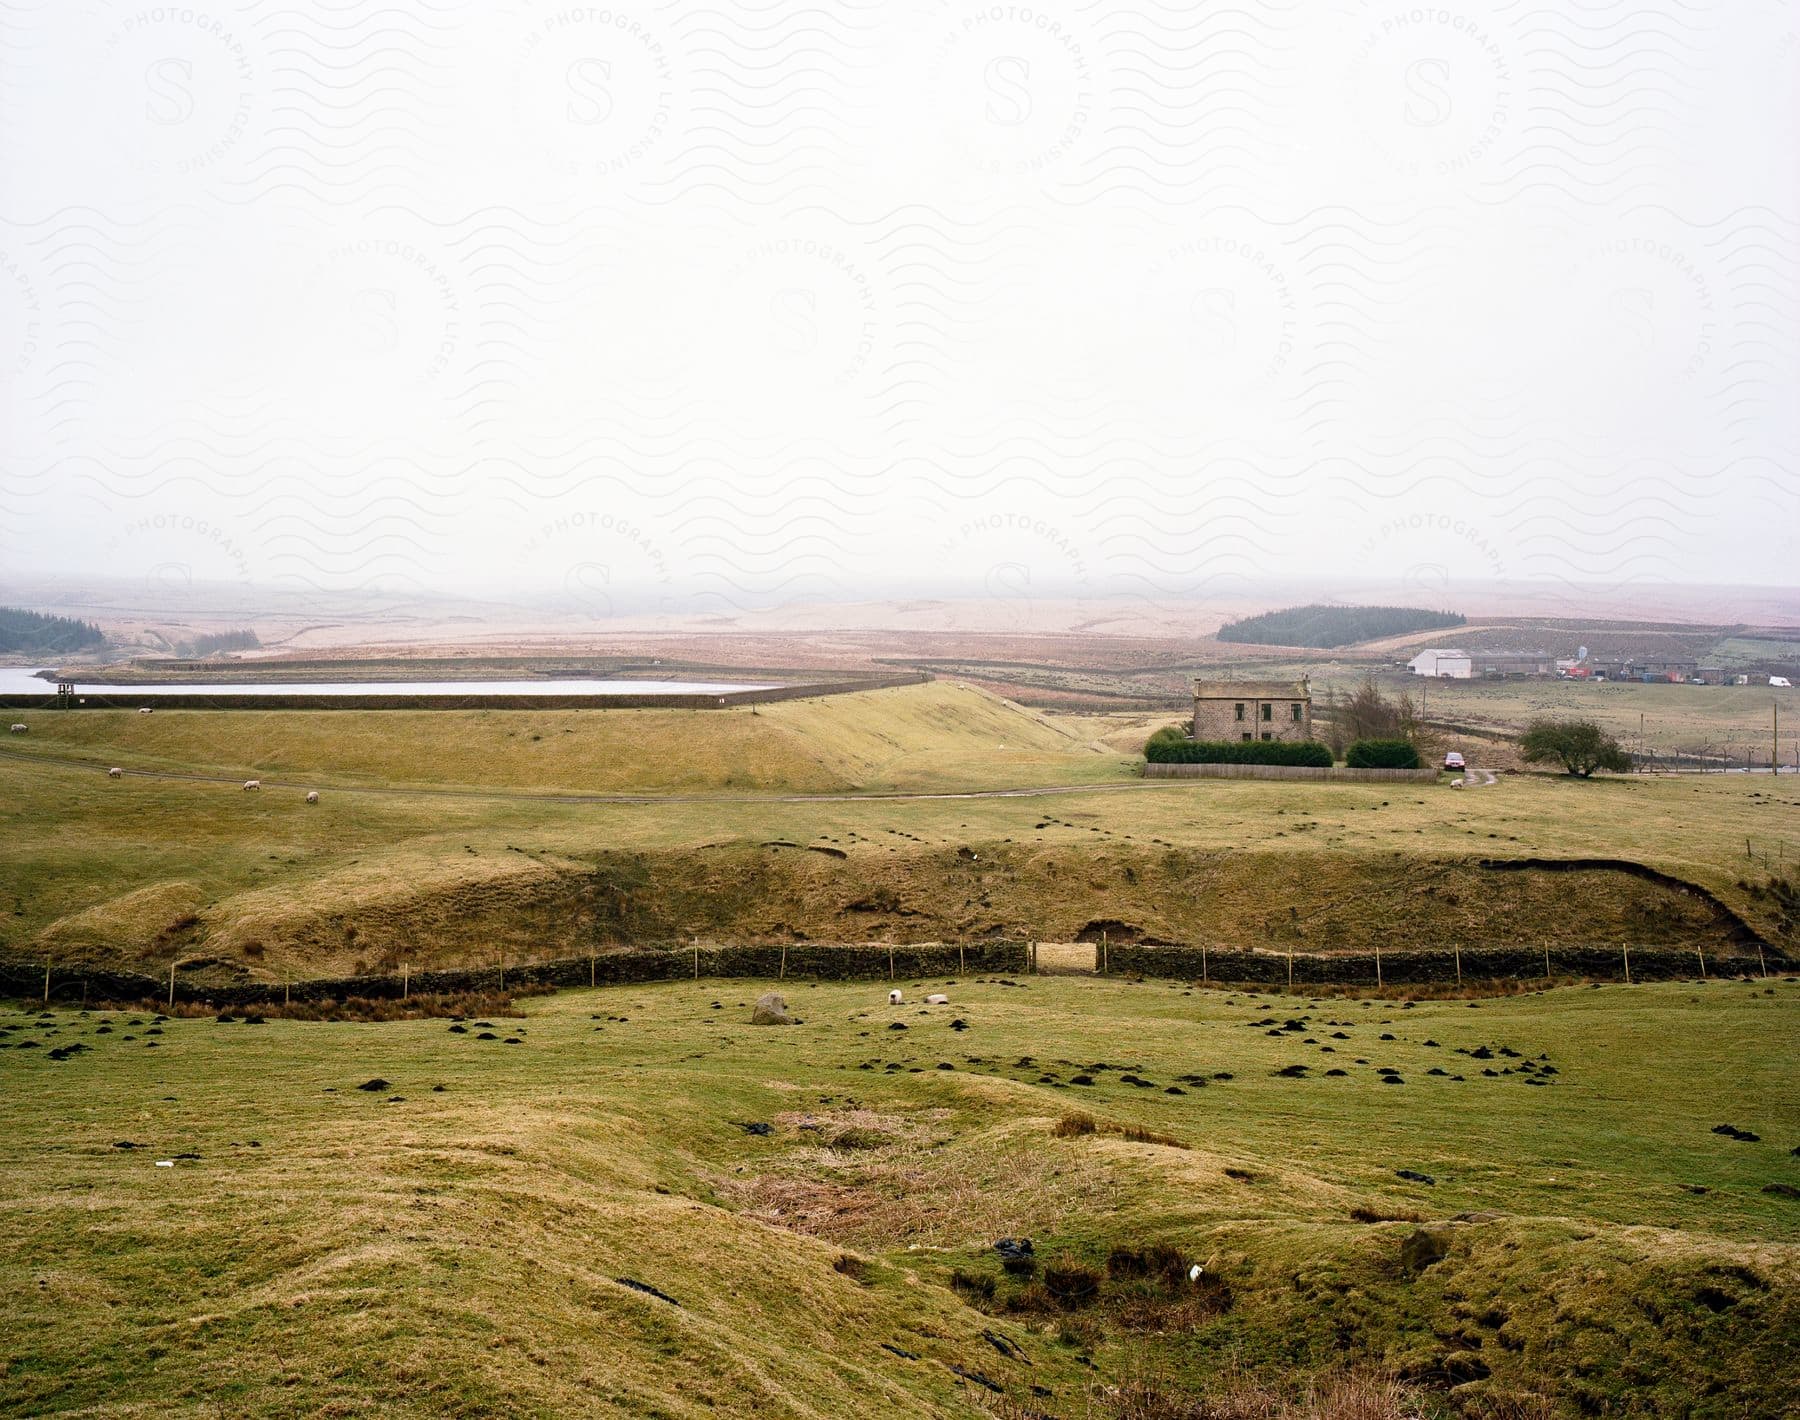 Sheep graze in a pasture with farm buildings and a reservoir in the distance